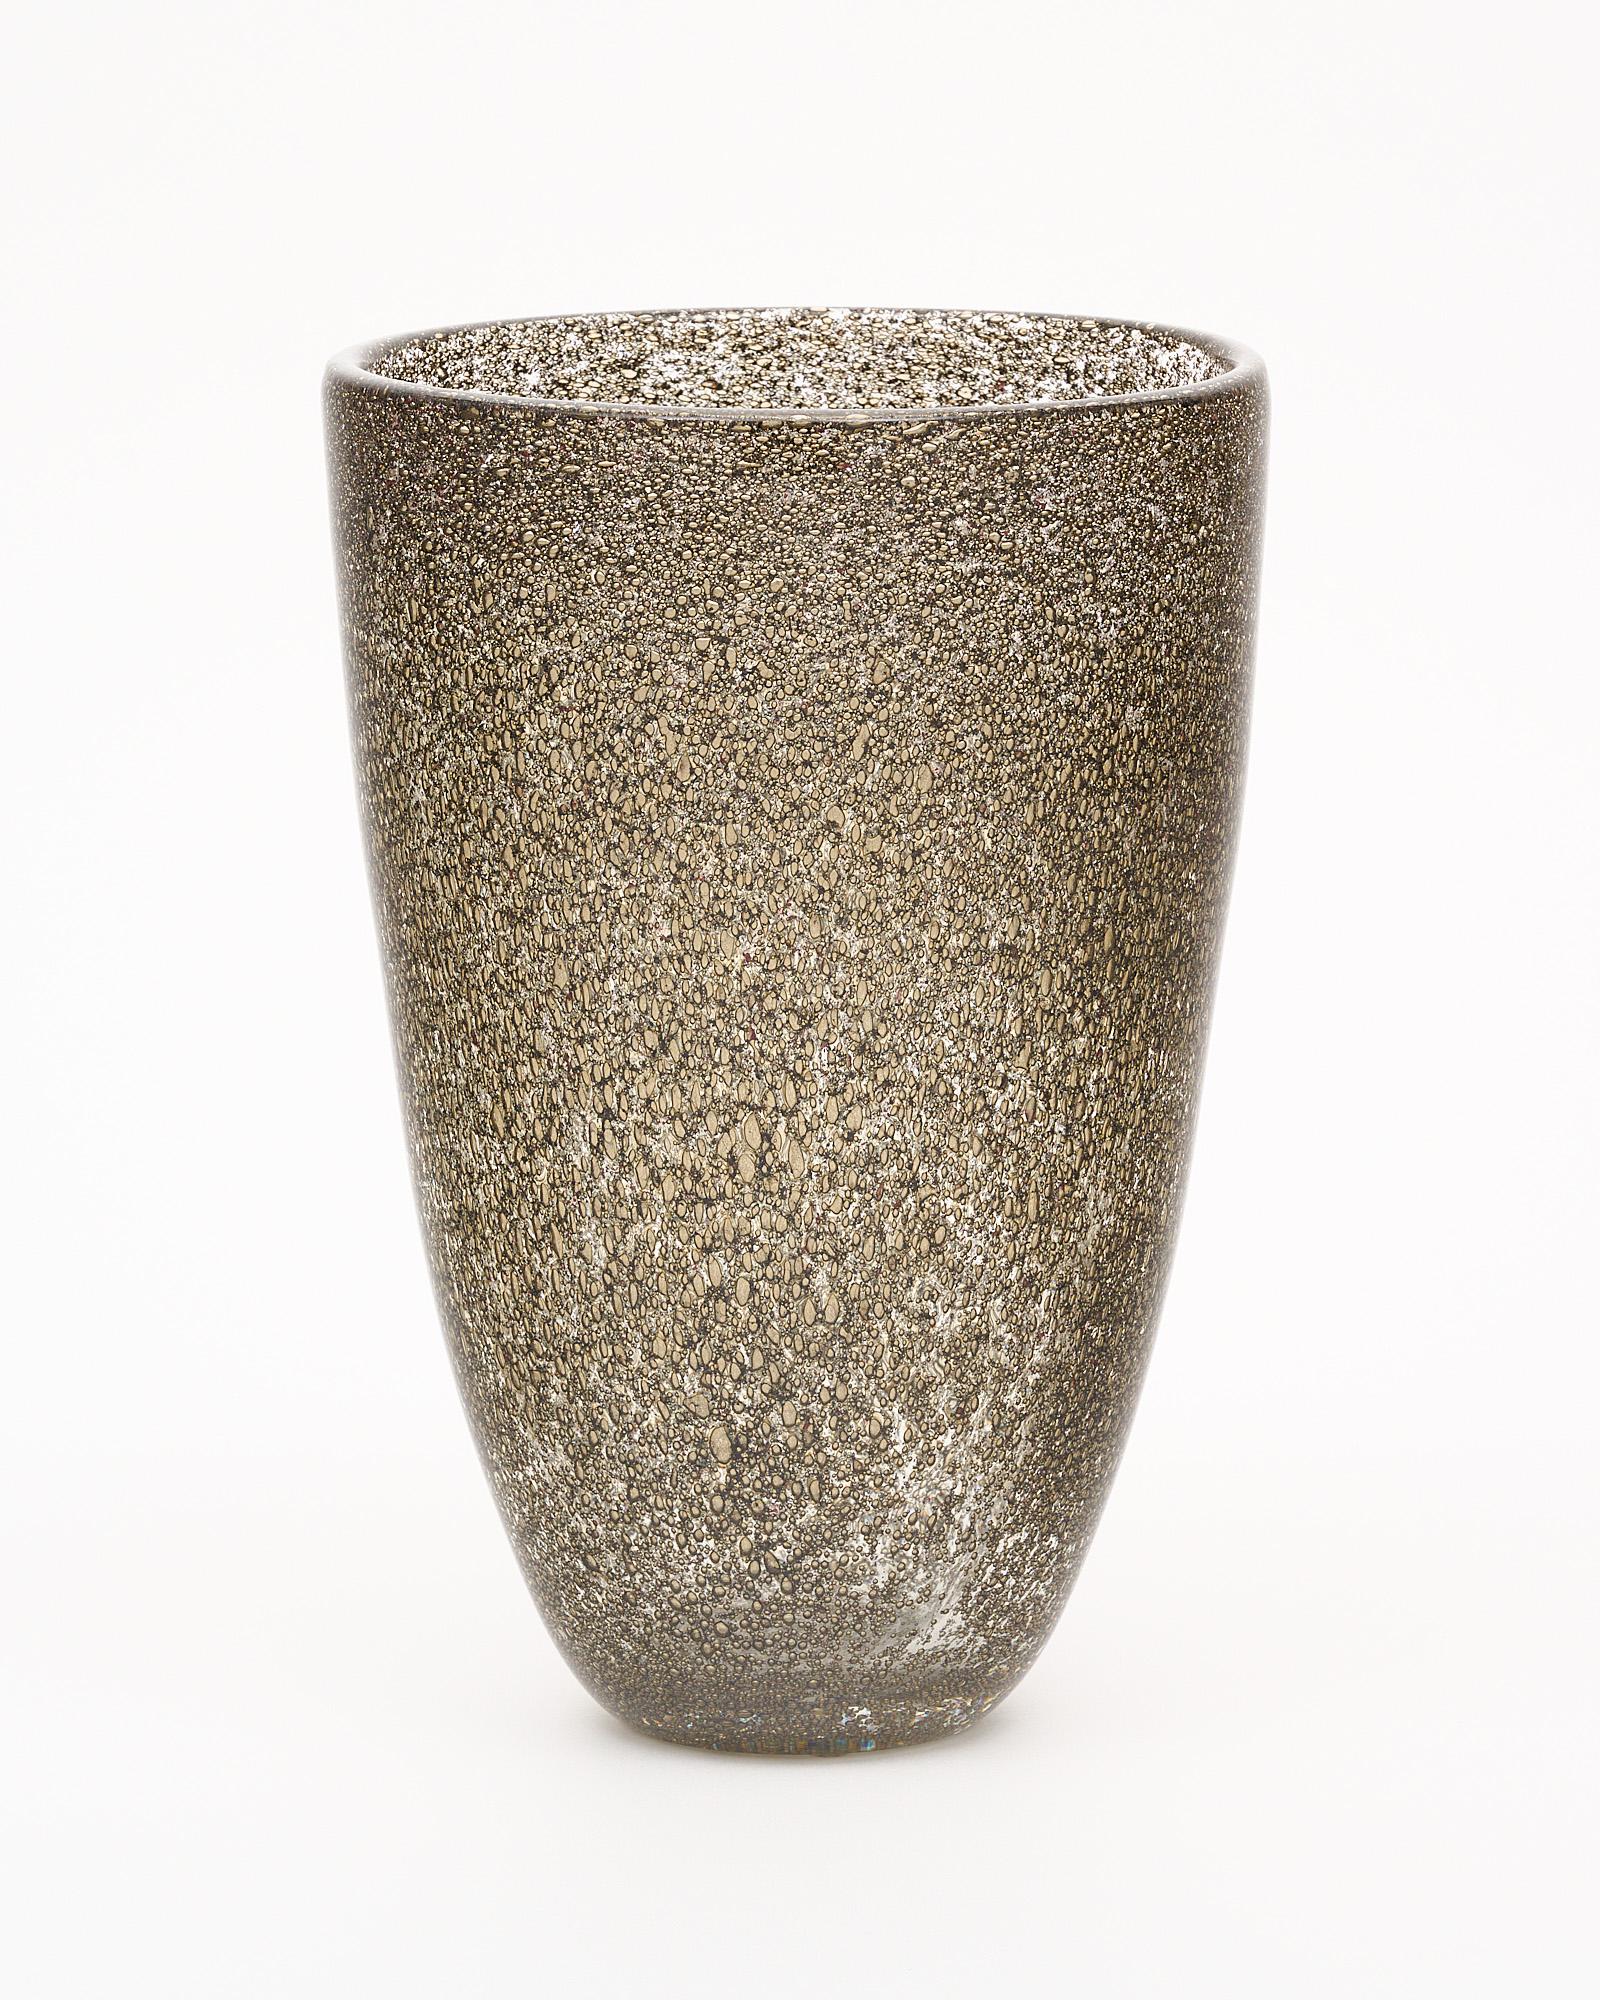 Vase from the island of Murano, Italy. This hand-blown vase is crafted using the pulegoso technique. Pulegoso glass, which appears full of bubbles, is made by injecting into the molten glass a component that reacts and in doing so releases gas